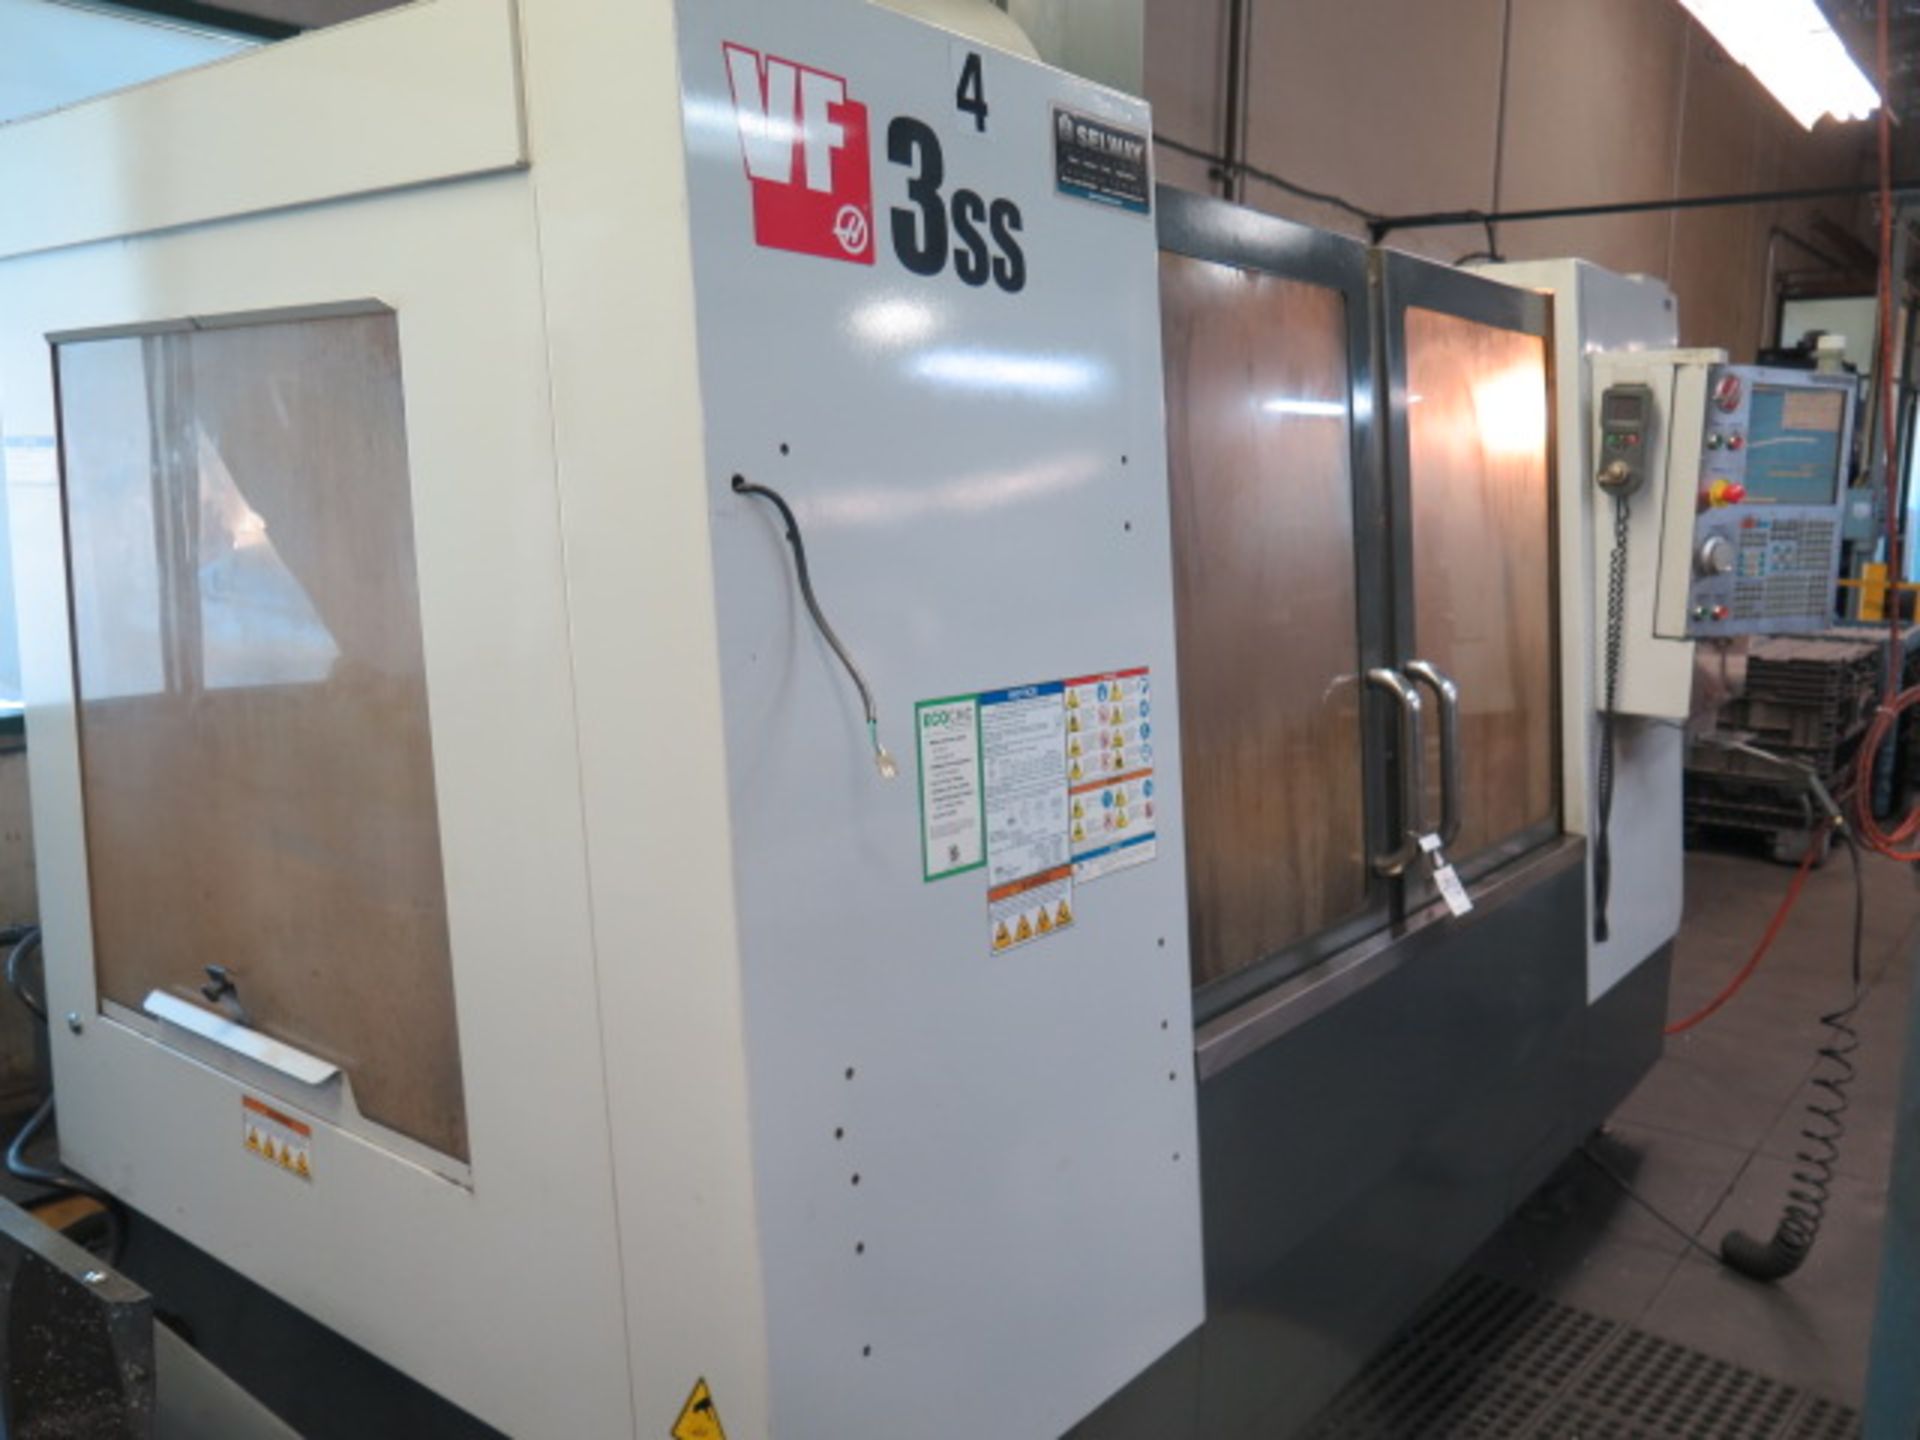 2010 Haas VF-3SS 4-Axis CNC VMC s/n 1081791 w/ Haas Controls, 24 ATC, SOLD AS IS, LIVERMORE, CA - Image 3 of 18